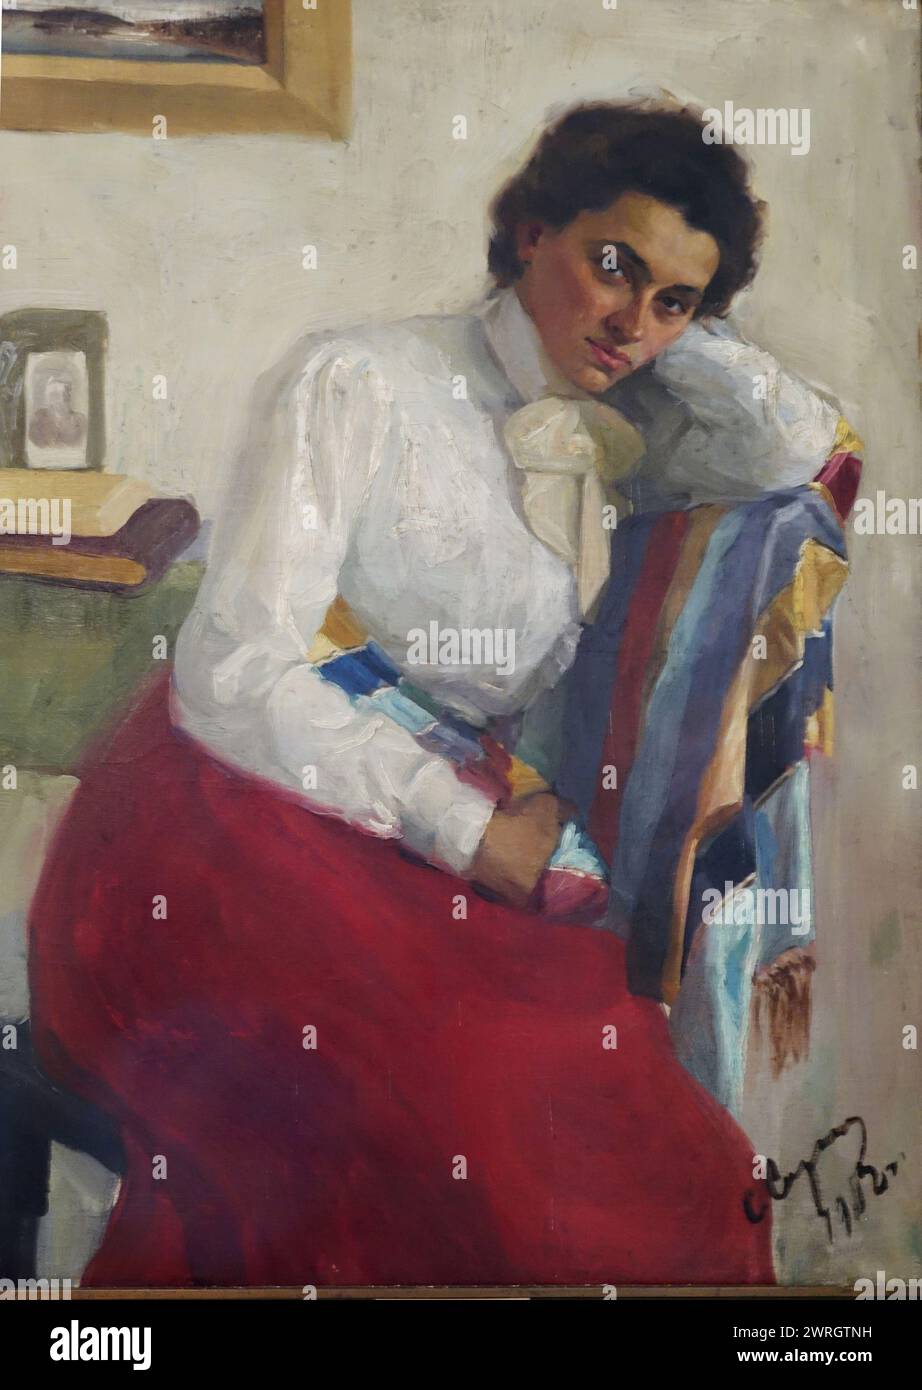 Portrait of Yekaterina Pavlovna Peshkova (1876-1965). Found in the Collection of State M. Gorky Museum, Moscow. Stock Photo